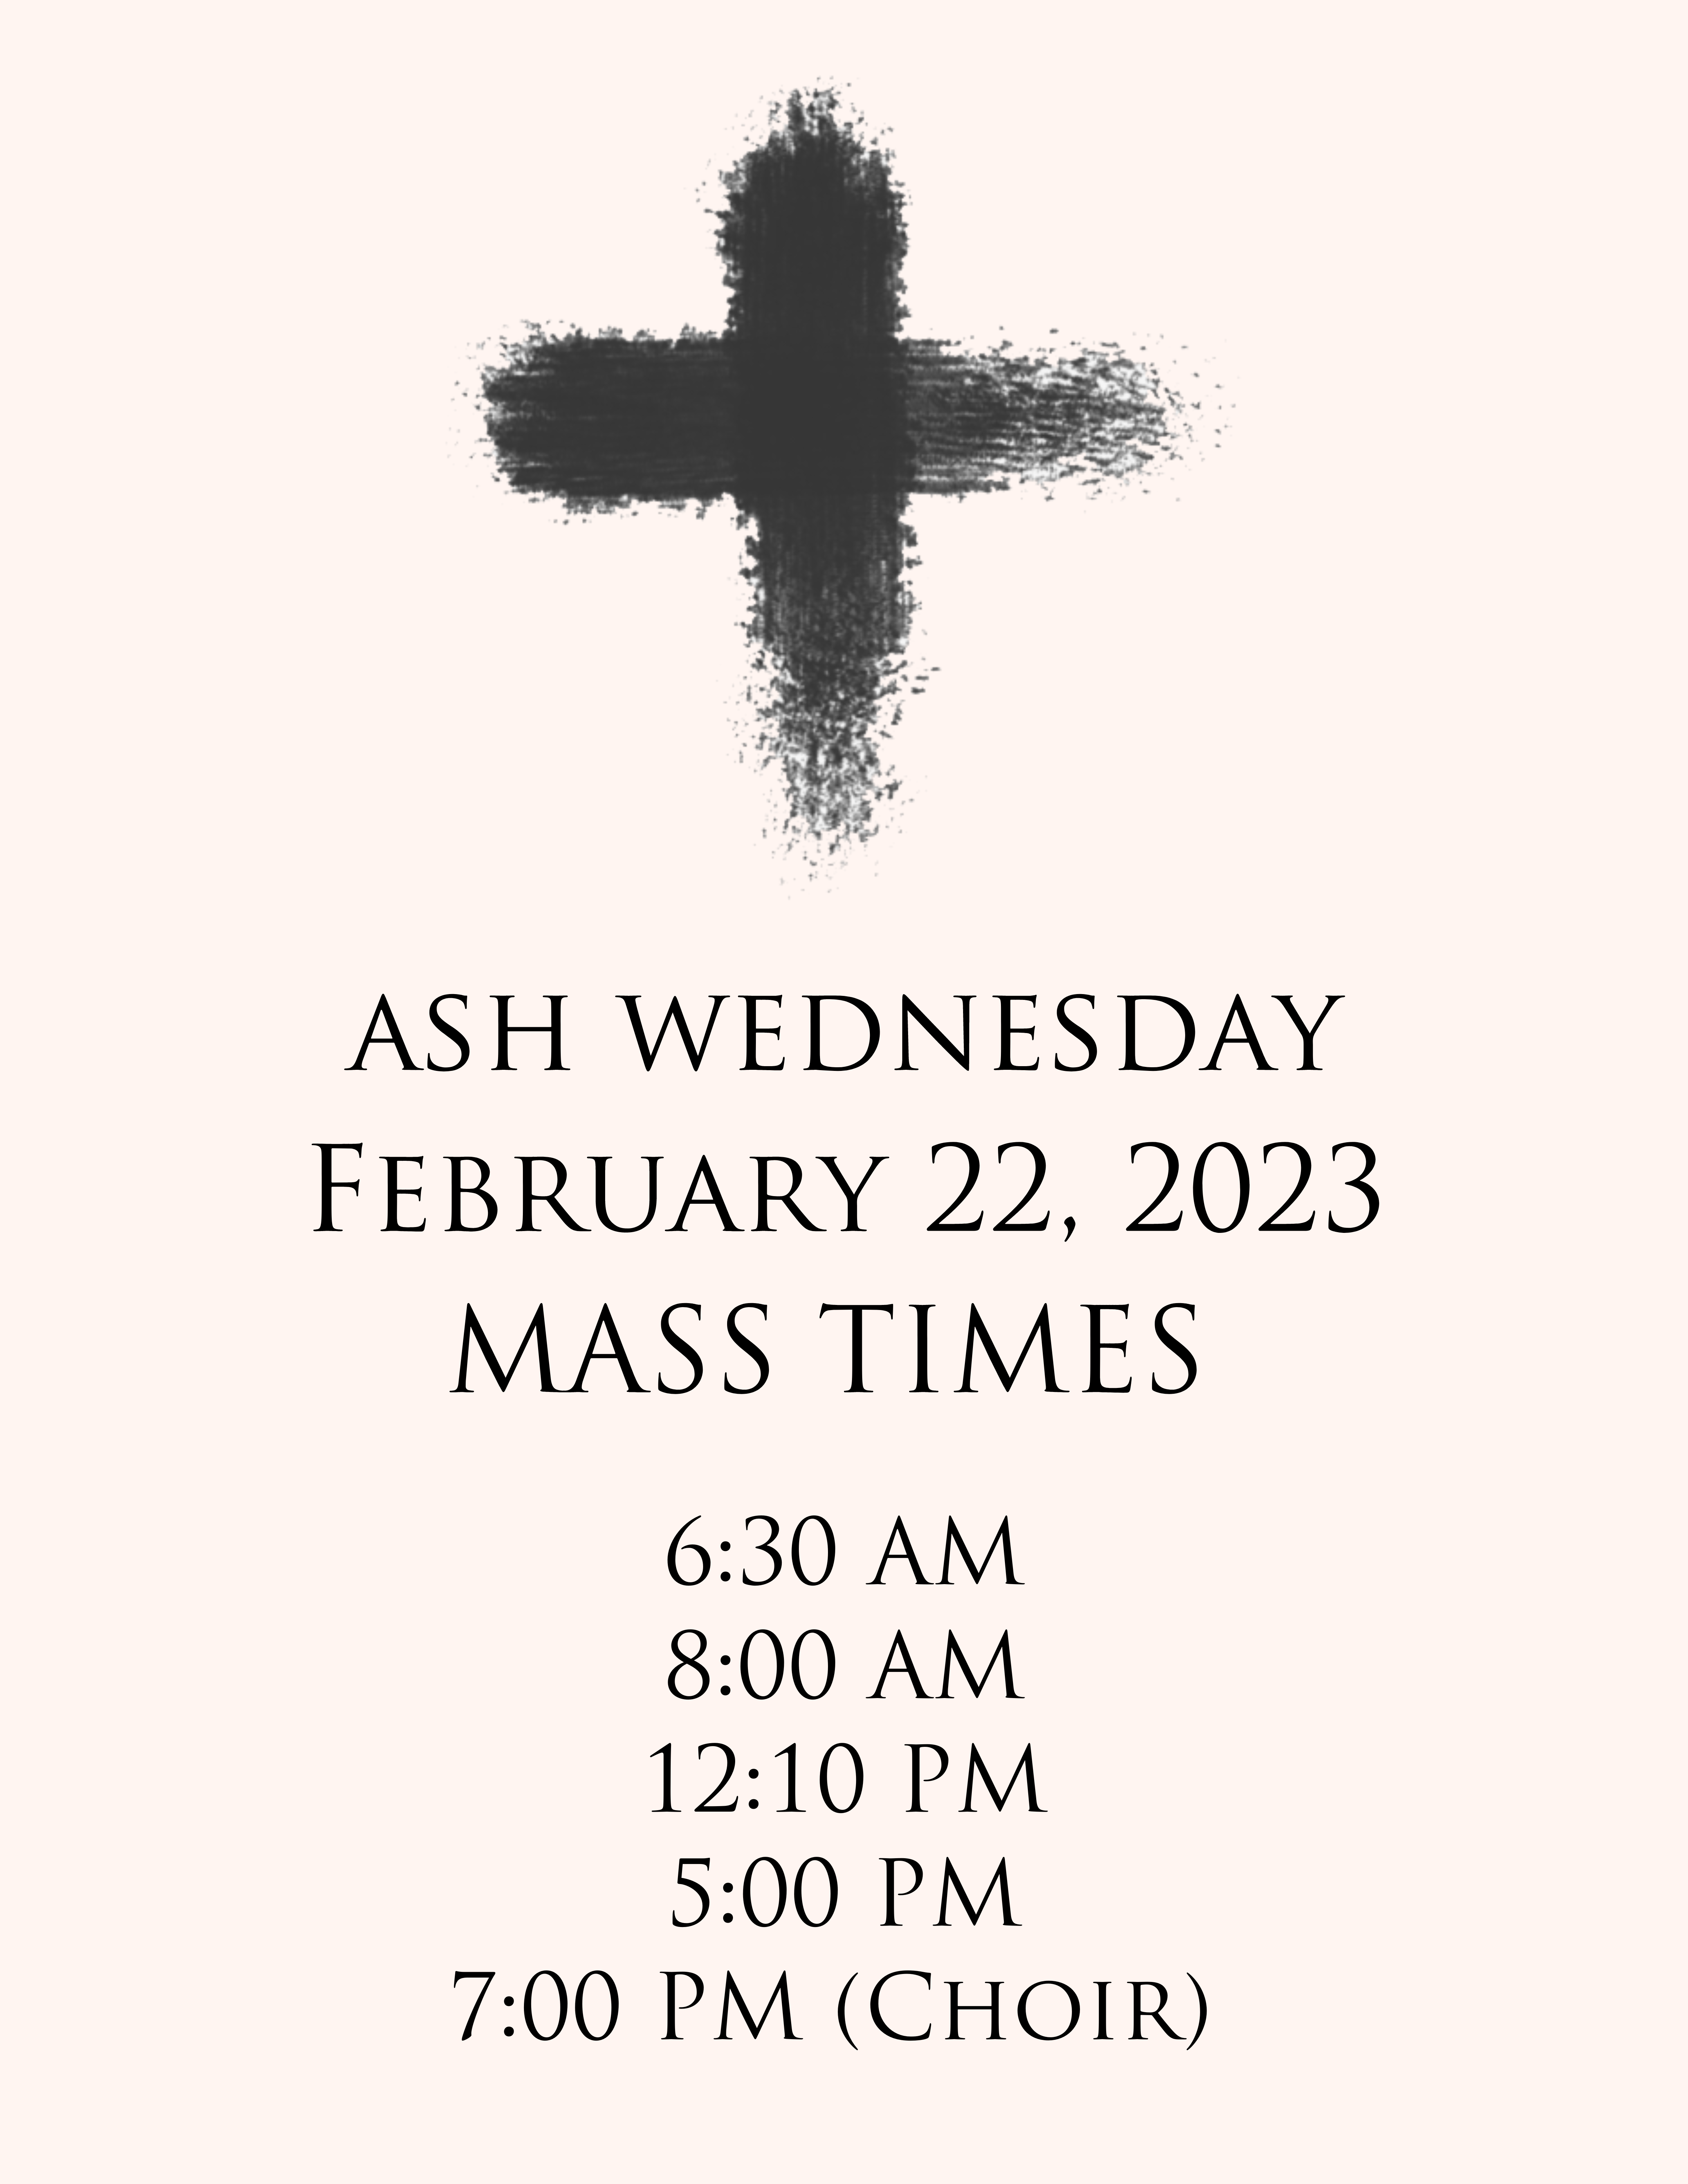 Mass Times for Ash Wednesday on February 22, 2023 - The Basilica of Saint  Mary